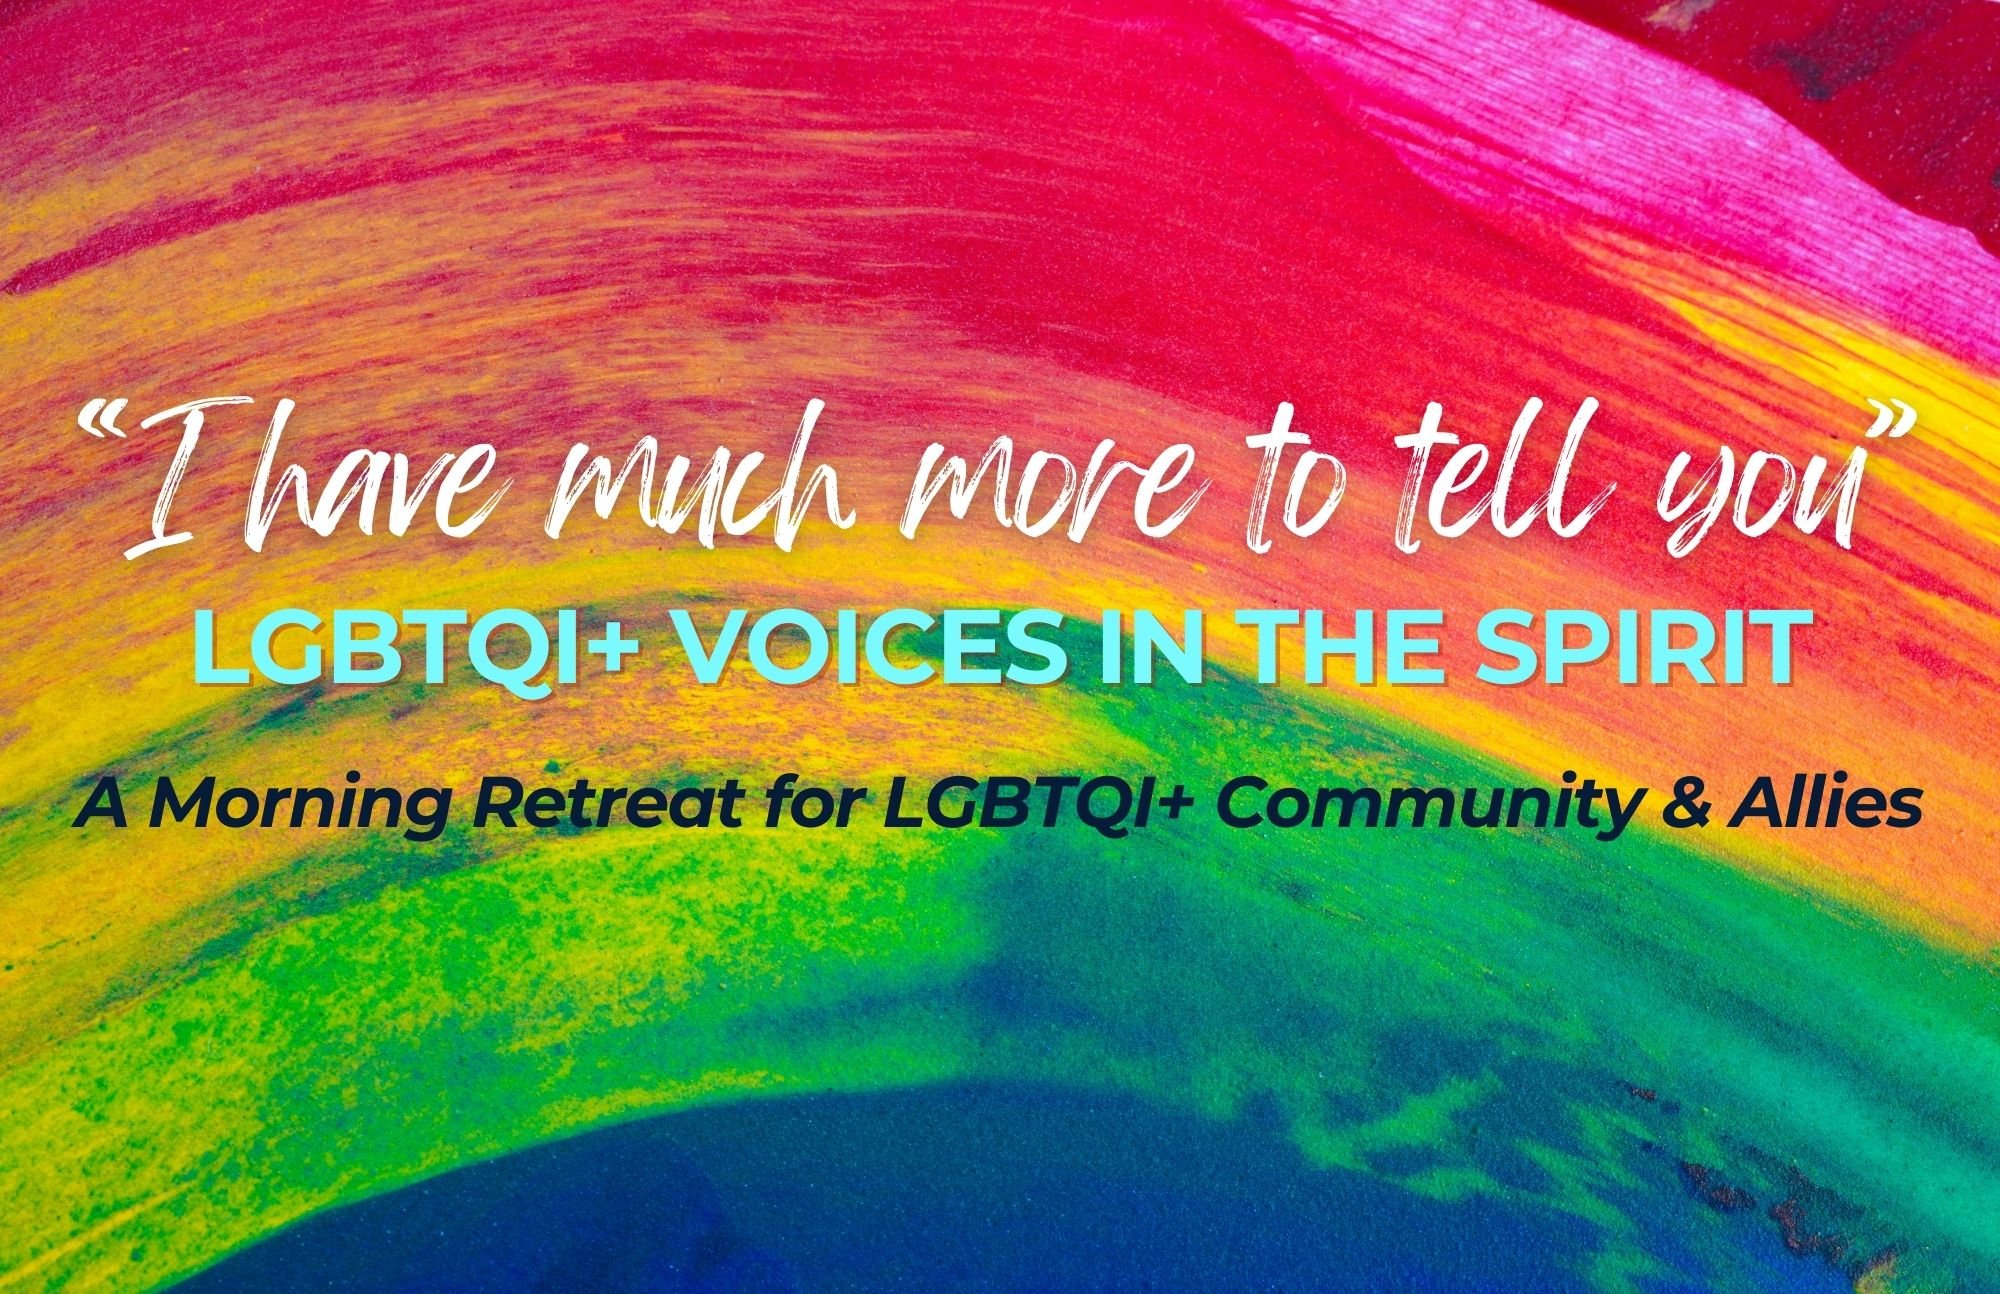 LGBTQI+ Voices in the Spirit Image - FINAL.jpg